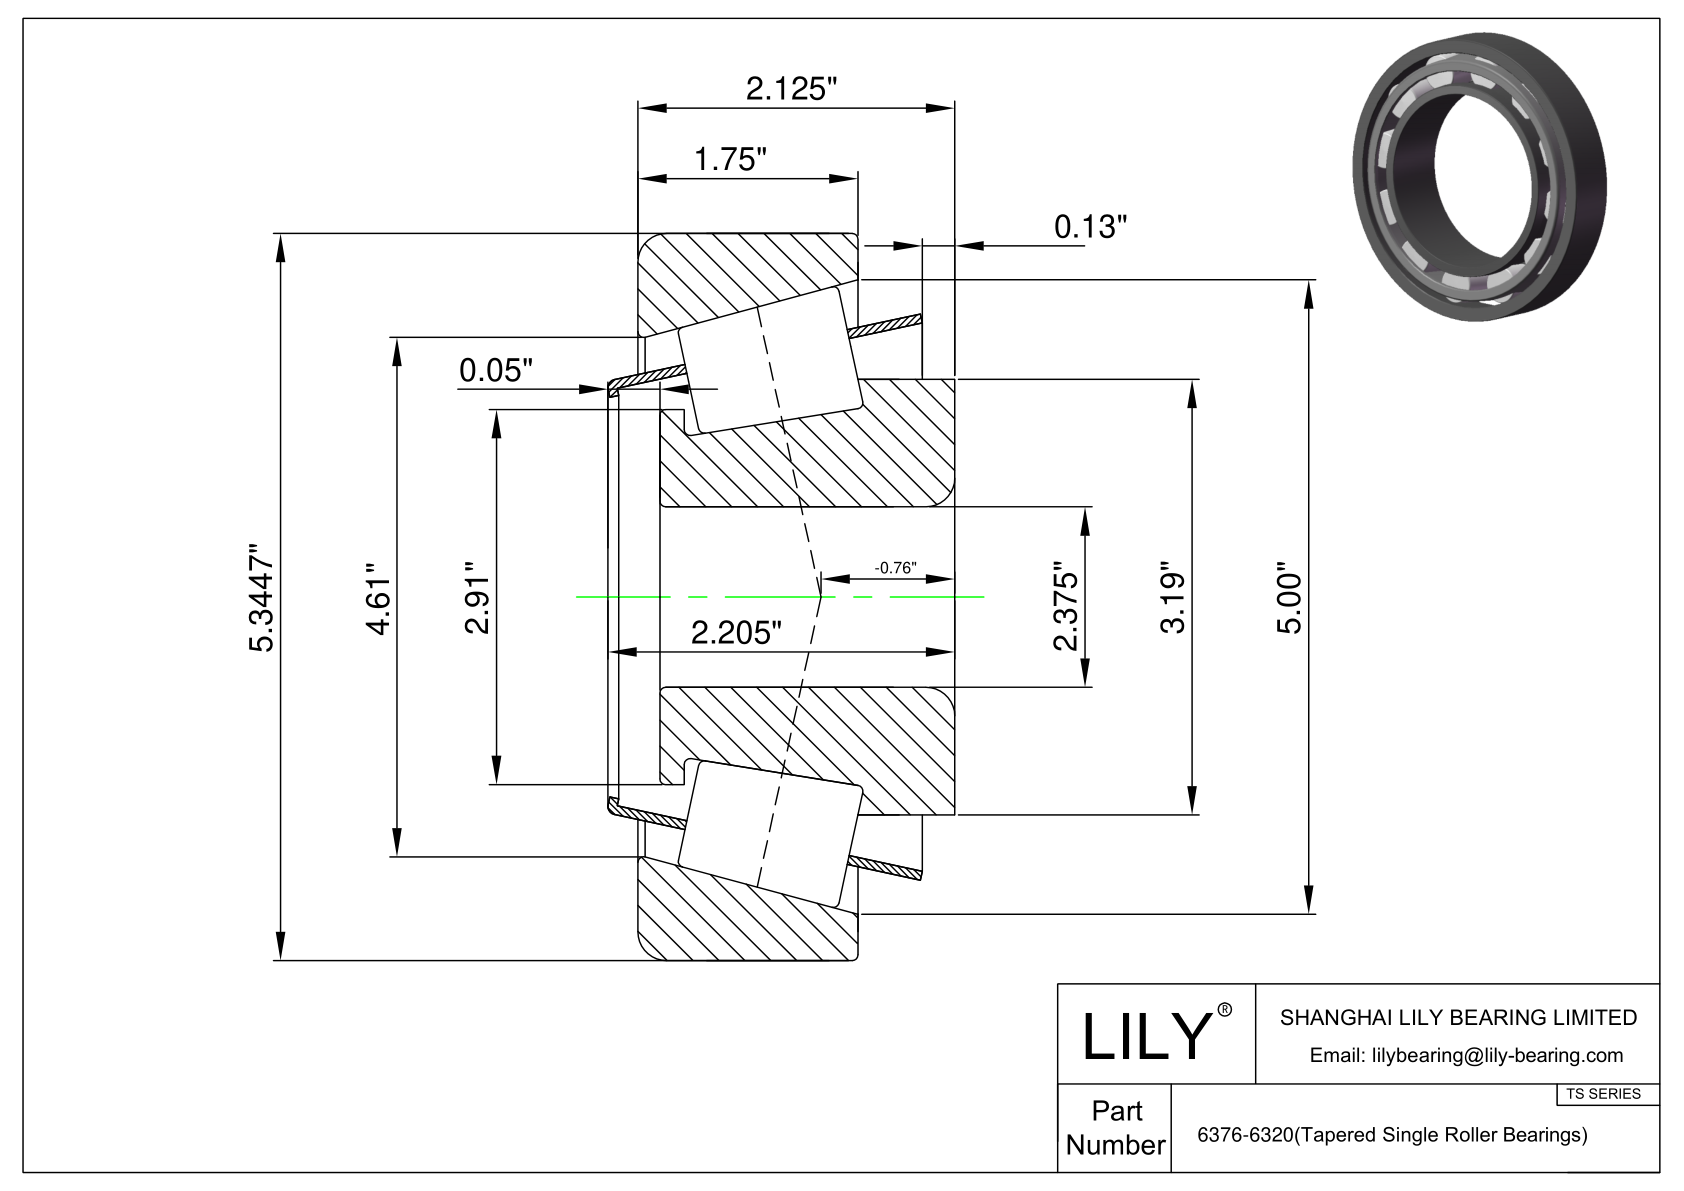 6376-6320 TS (Tapered Single Roller Bearings) (Imperial) cad drawing